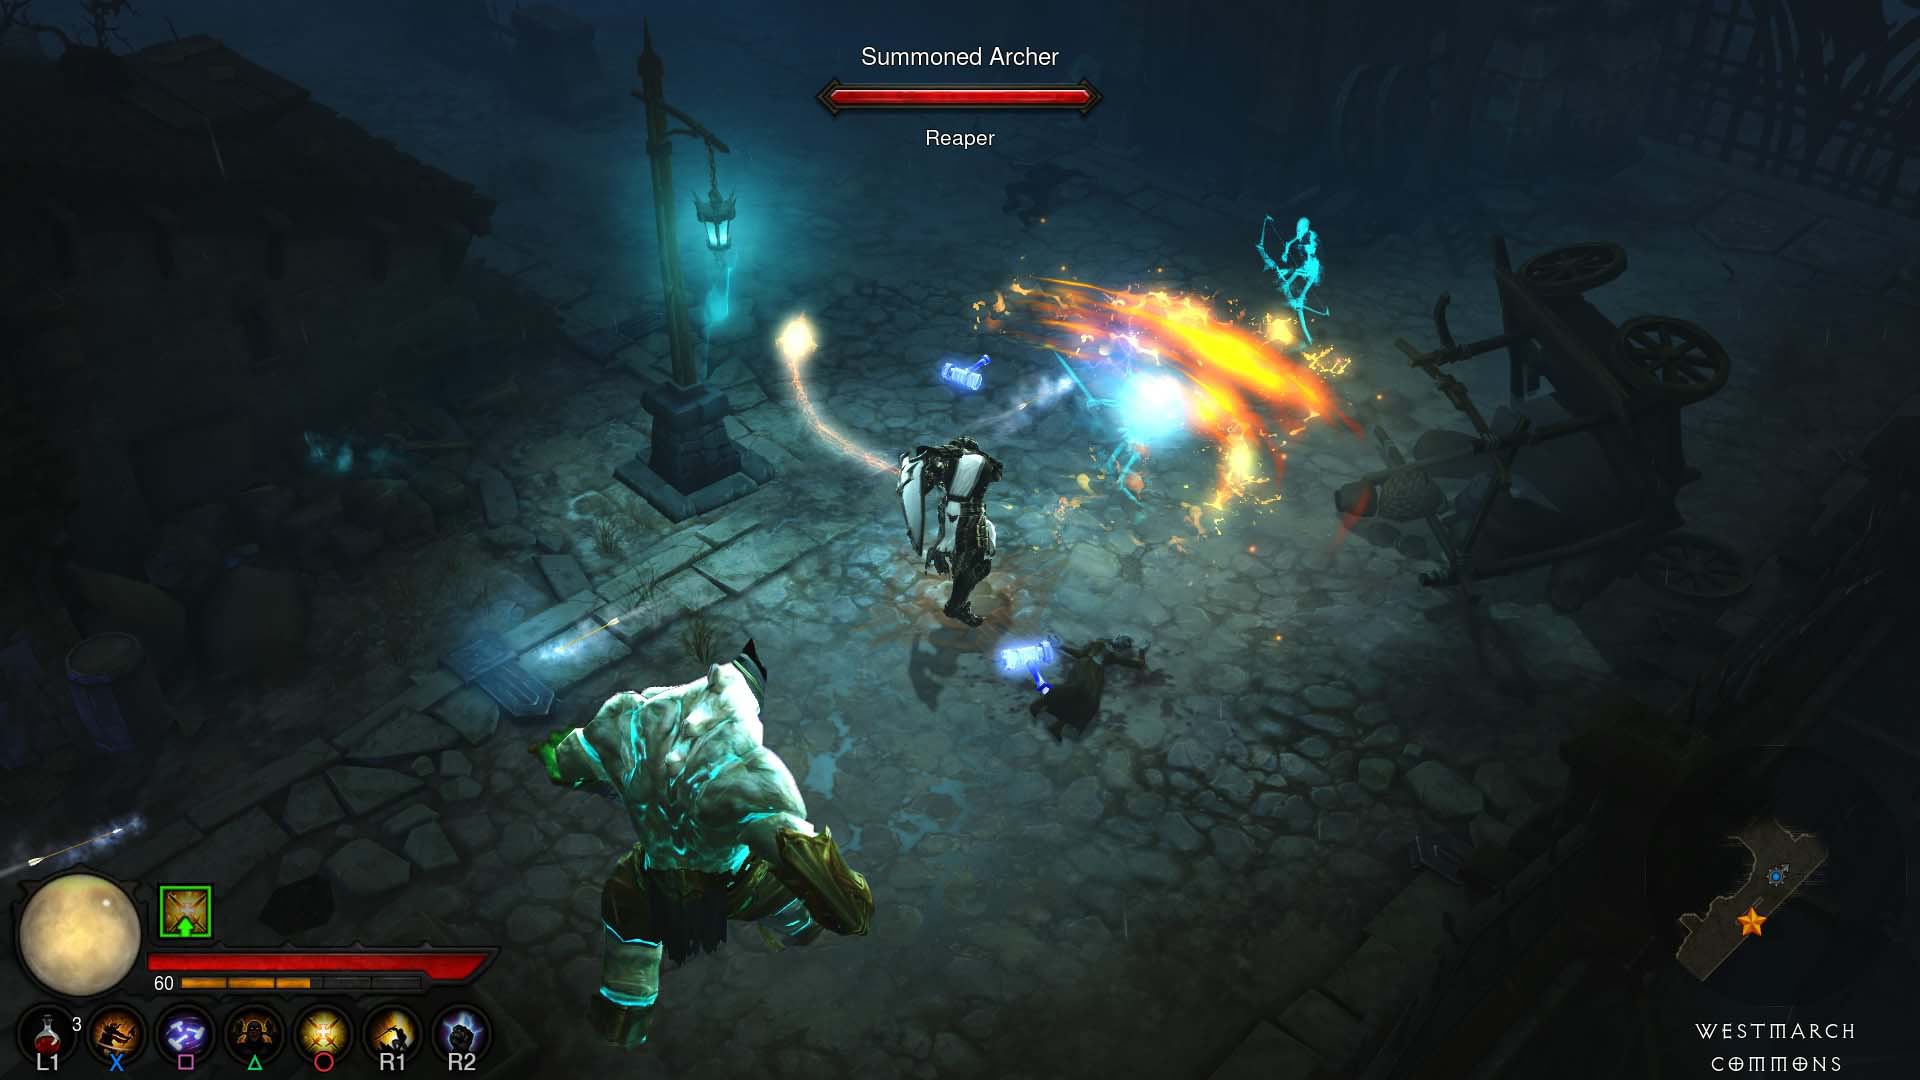 Diablo 3 for PS4 has exclusive features on PC, PS3 character transfers - Polygon